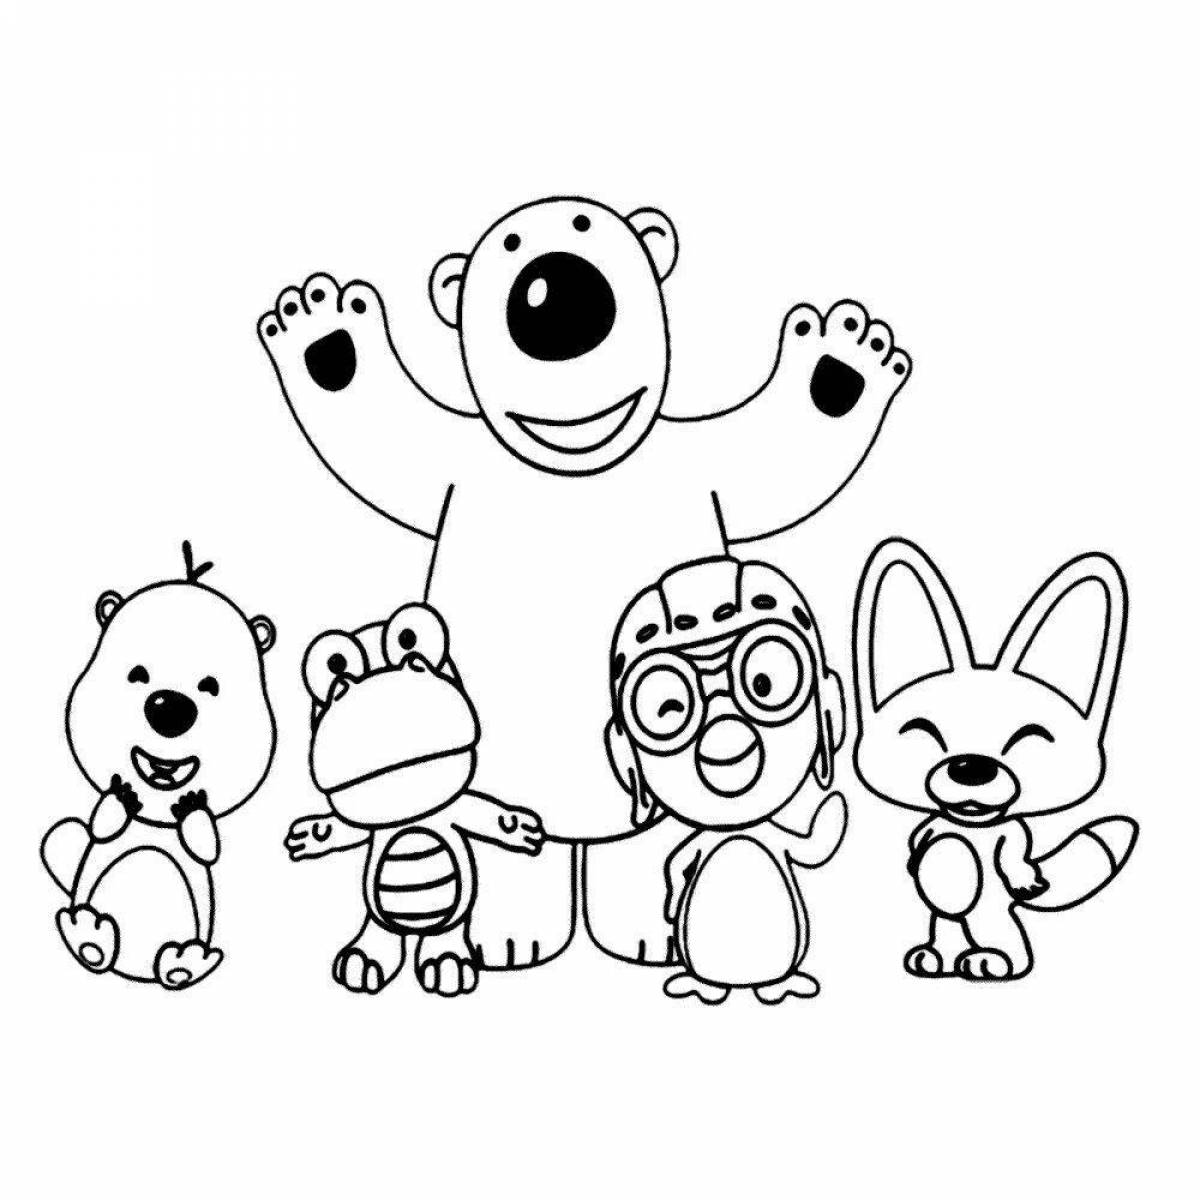 Sweet pororo coloring page